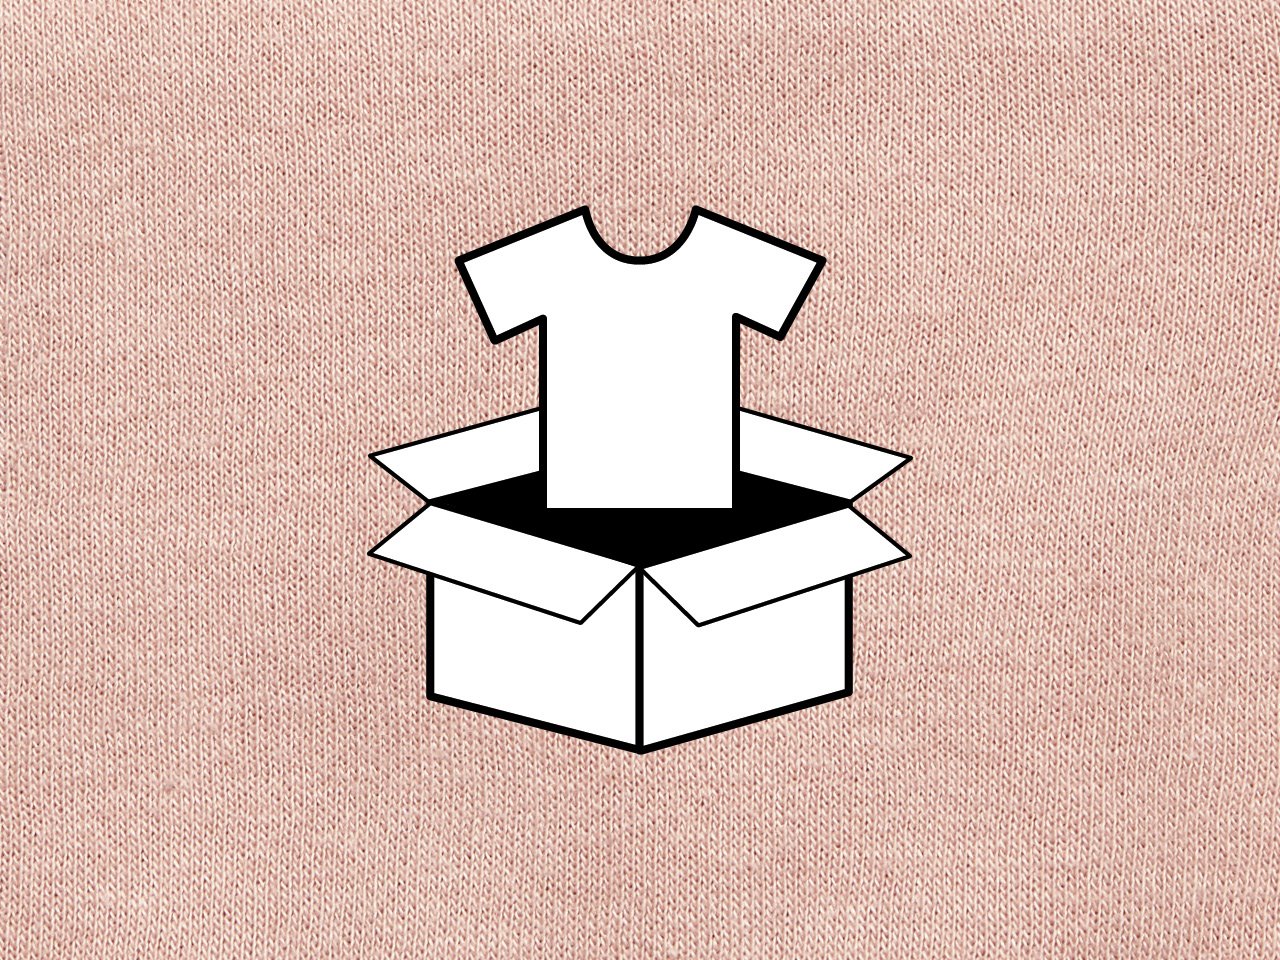 An illustration of a t-shirt going into a box on a pink cloth background